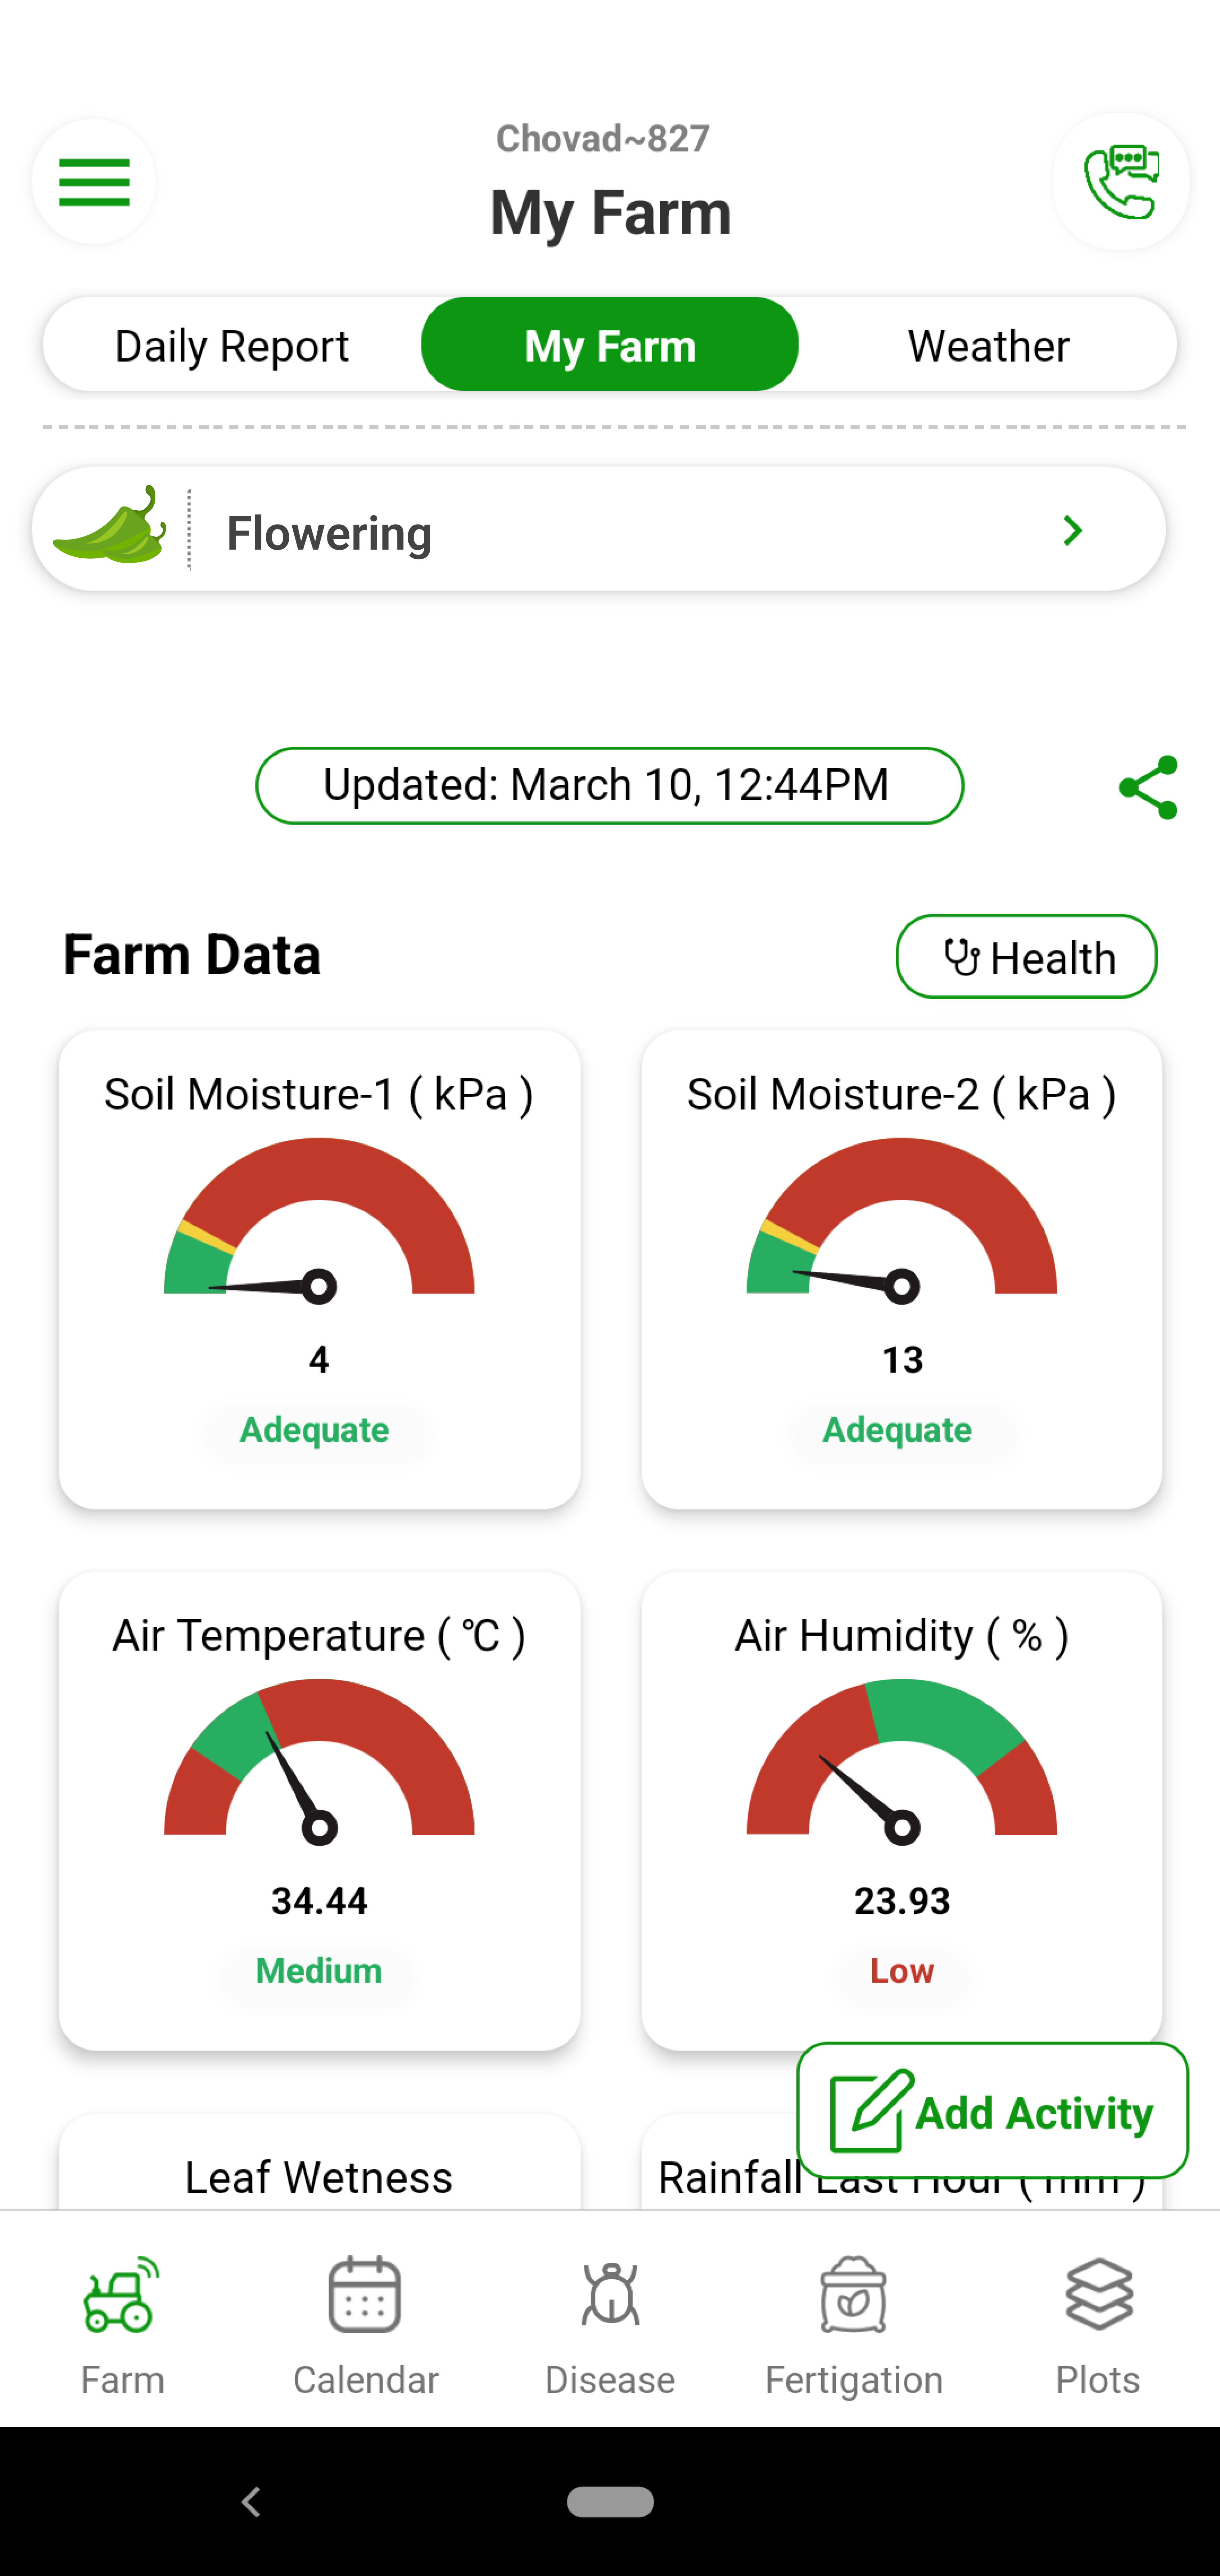 Fyllo device installed at your farm monitors your farm 24*7 and captures 12 critical parameters in real time. You get this data on you mobile and dashboard in real time. You get to monitor where the crop is getting enough sunlight, proper temperature or humidity.